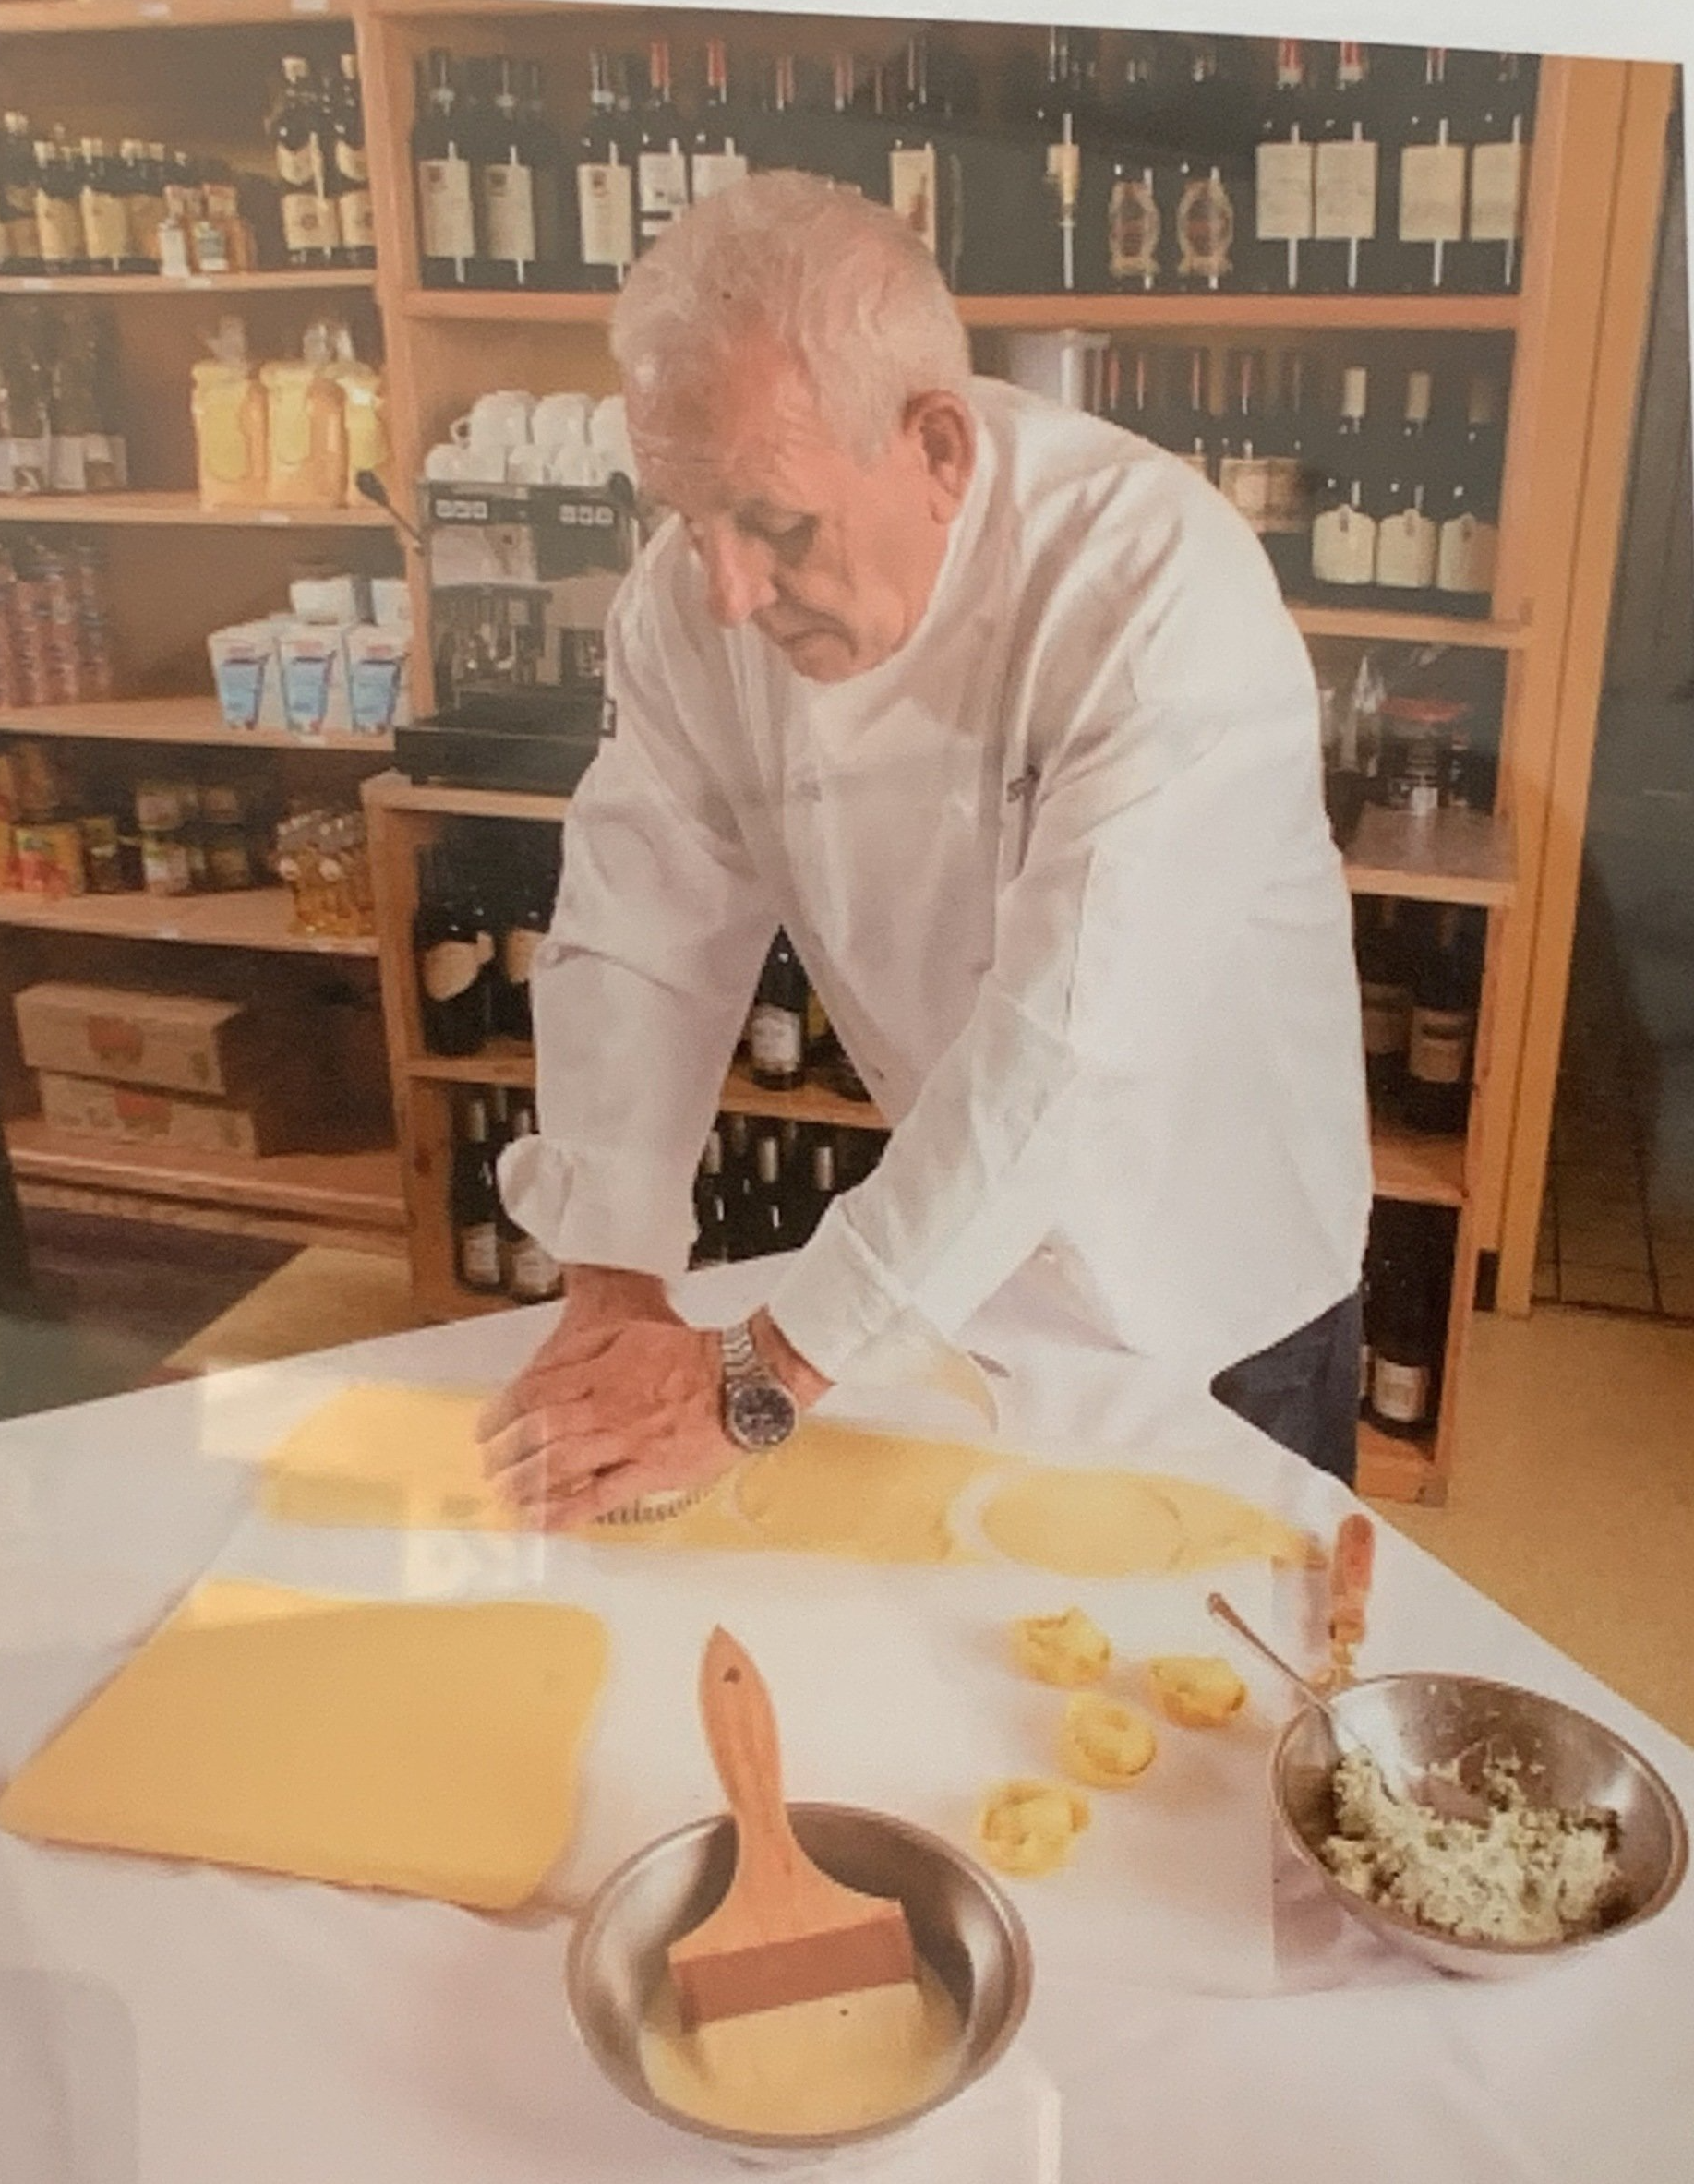 a man in a white shirt is preparing food on a table